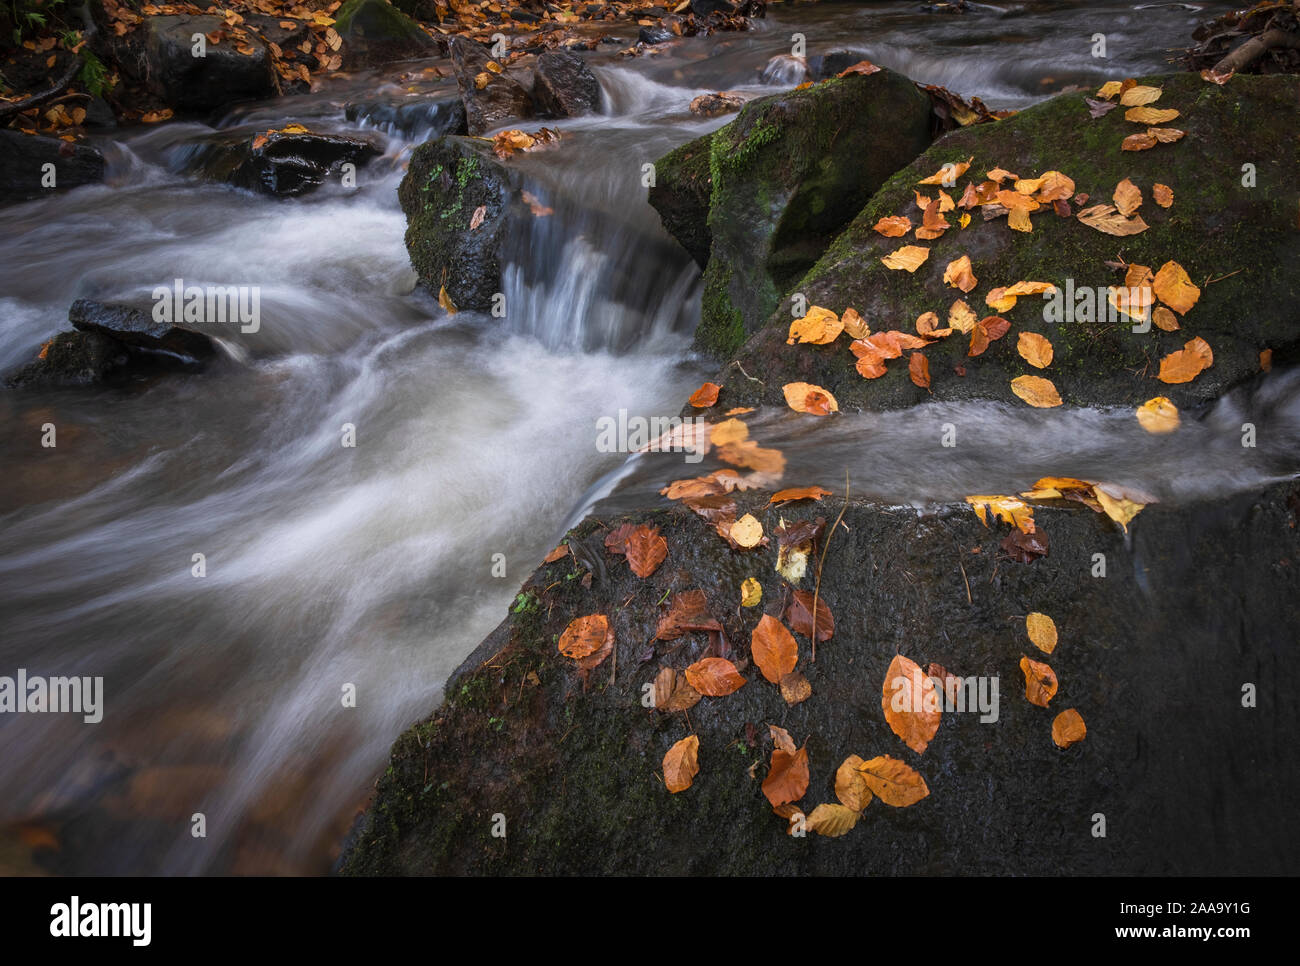 Autumnal landscape, fallen golden colour /color autumn leaves on rocks beside a fast moving stream or river Stock Photo